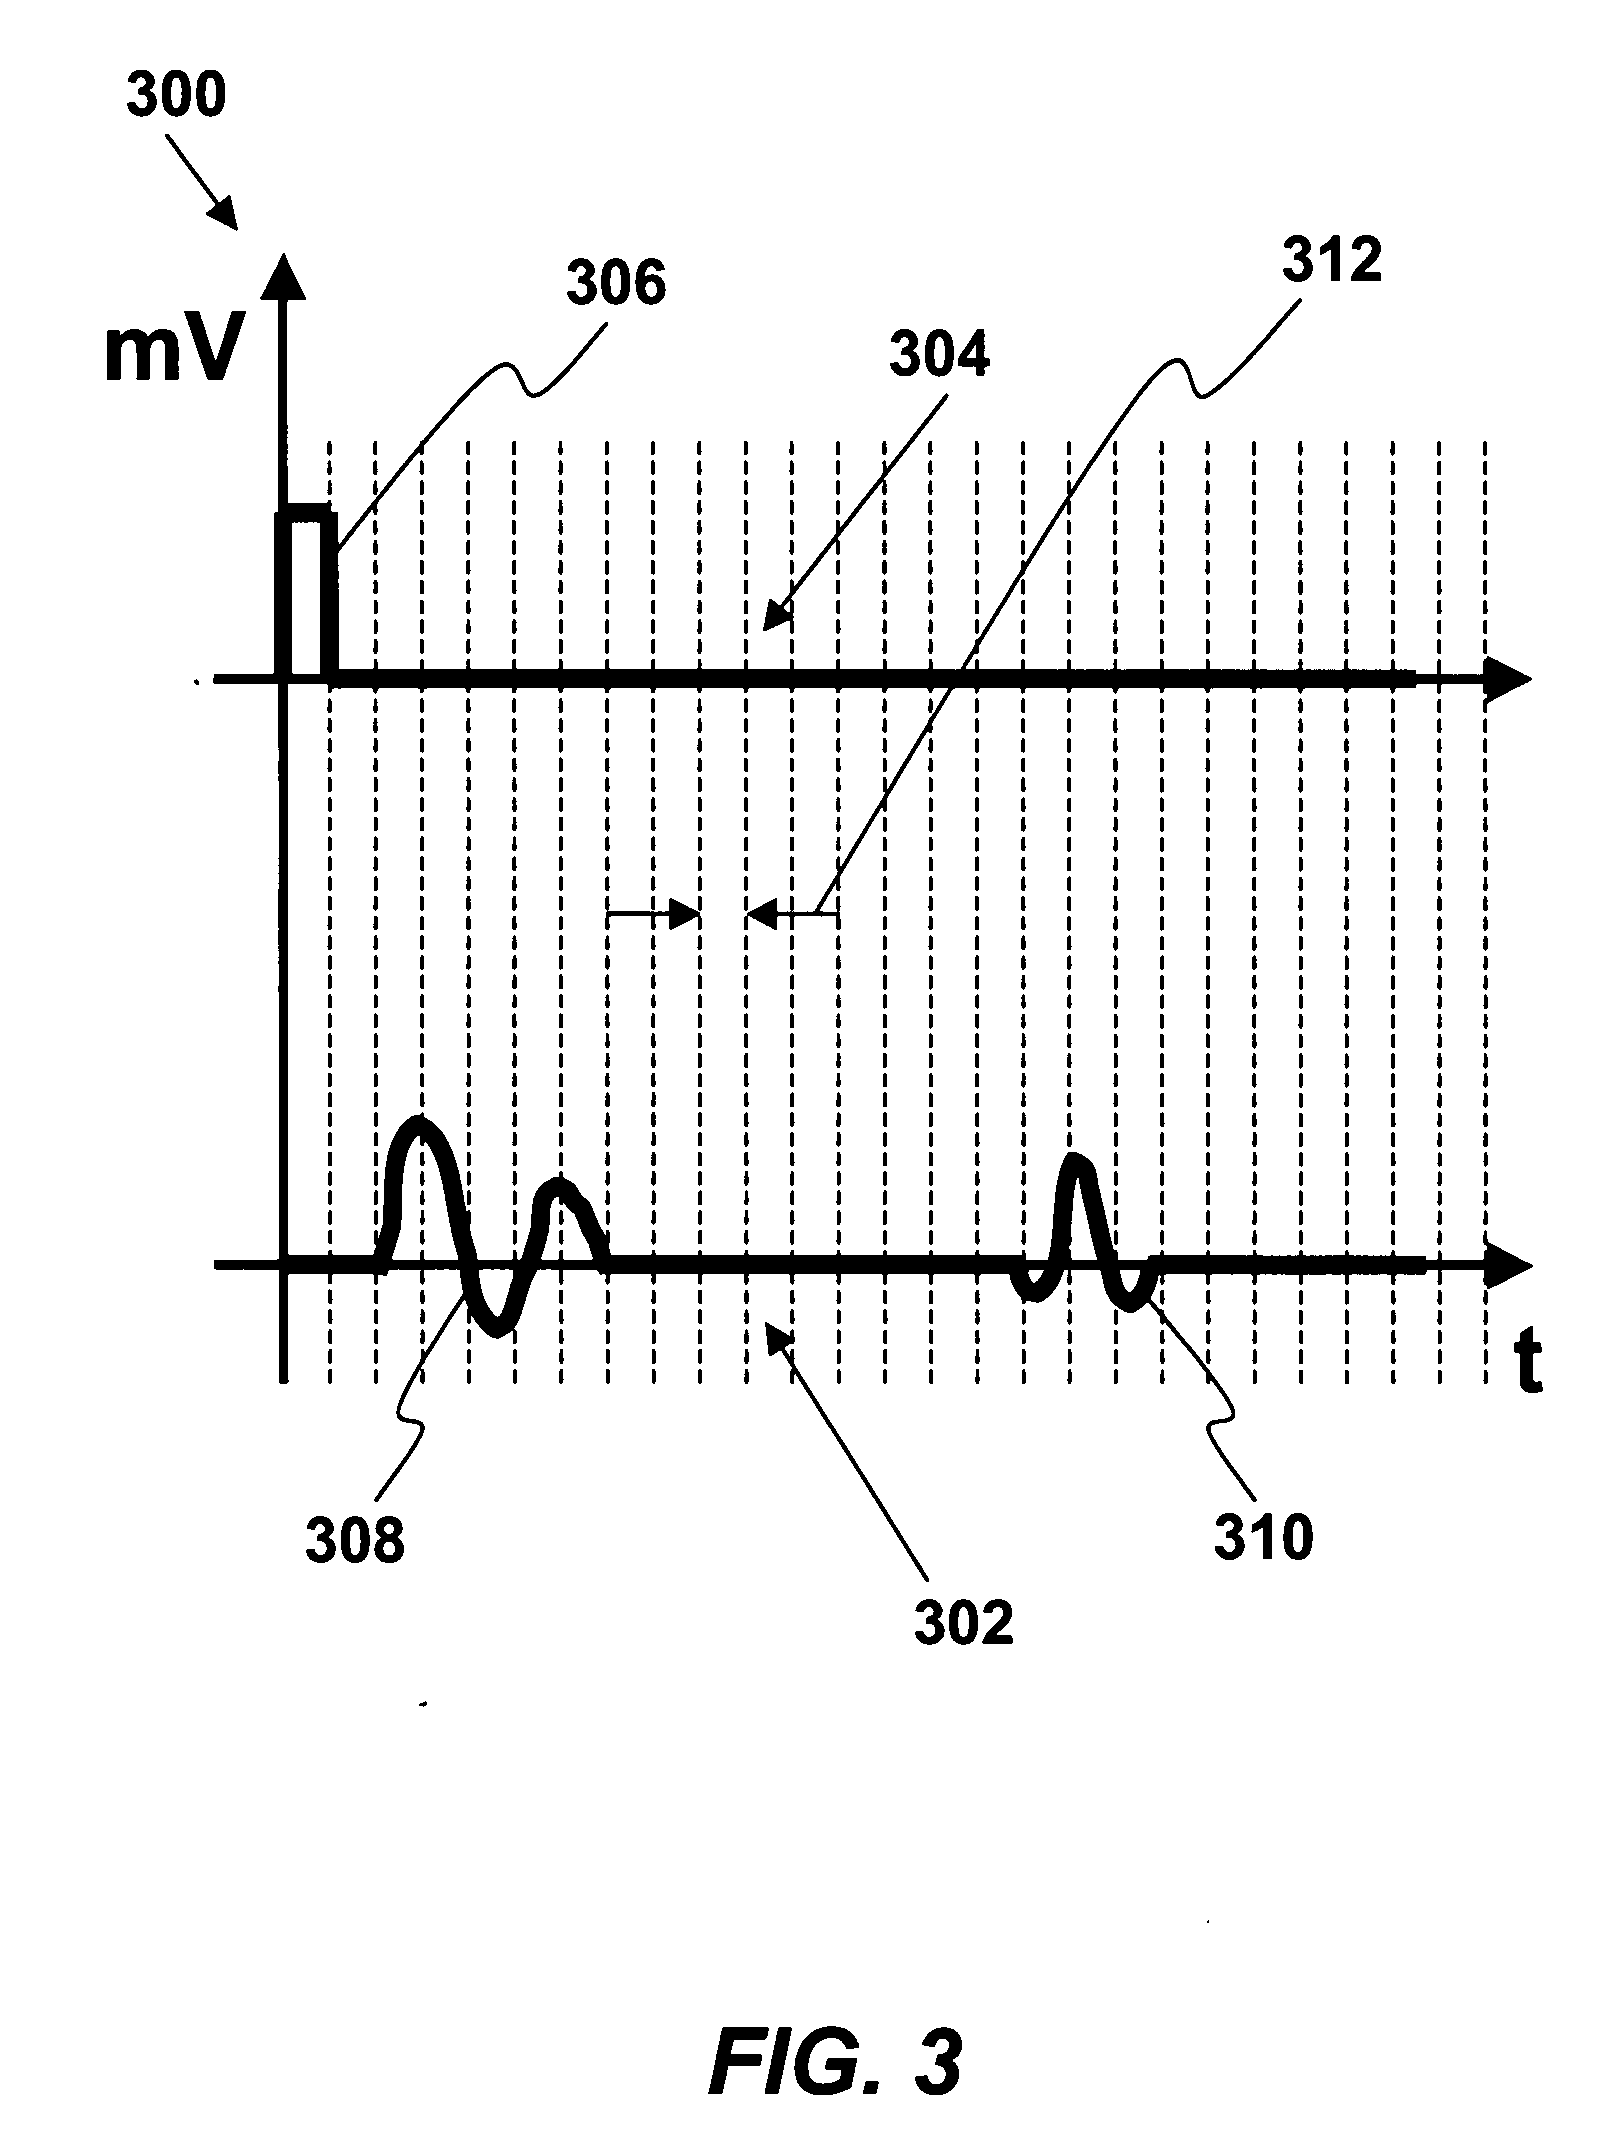 Use of line characterization to configure physical layered devices